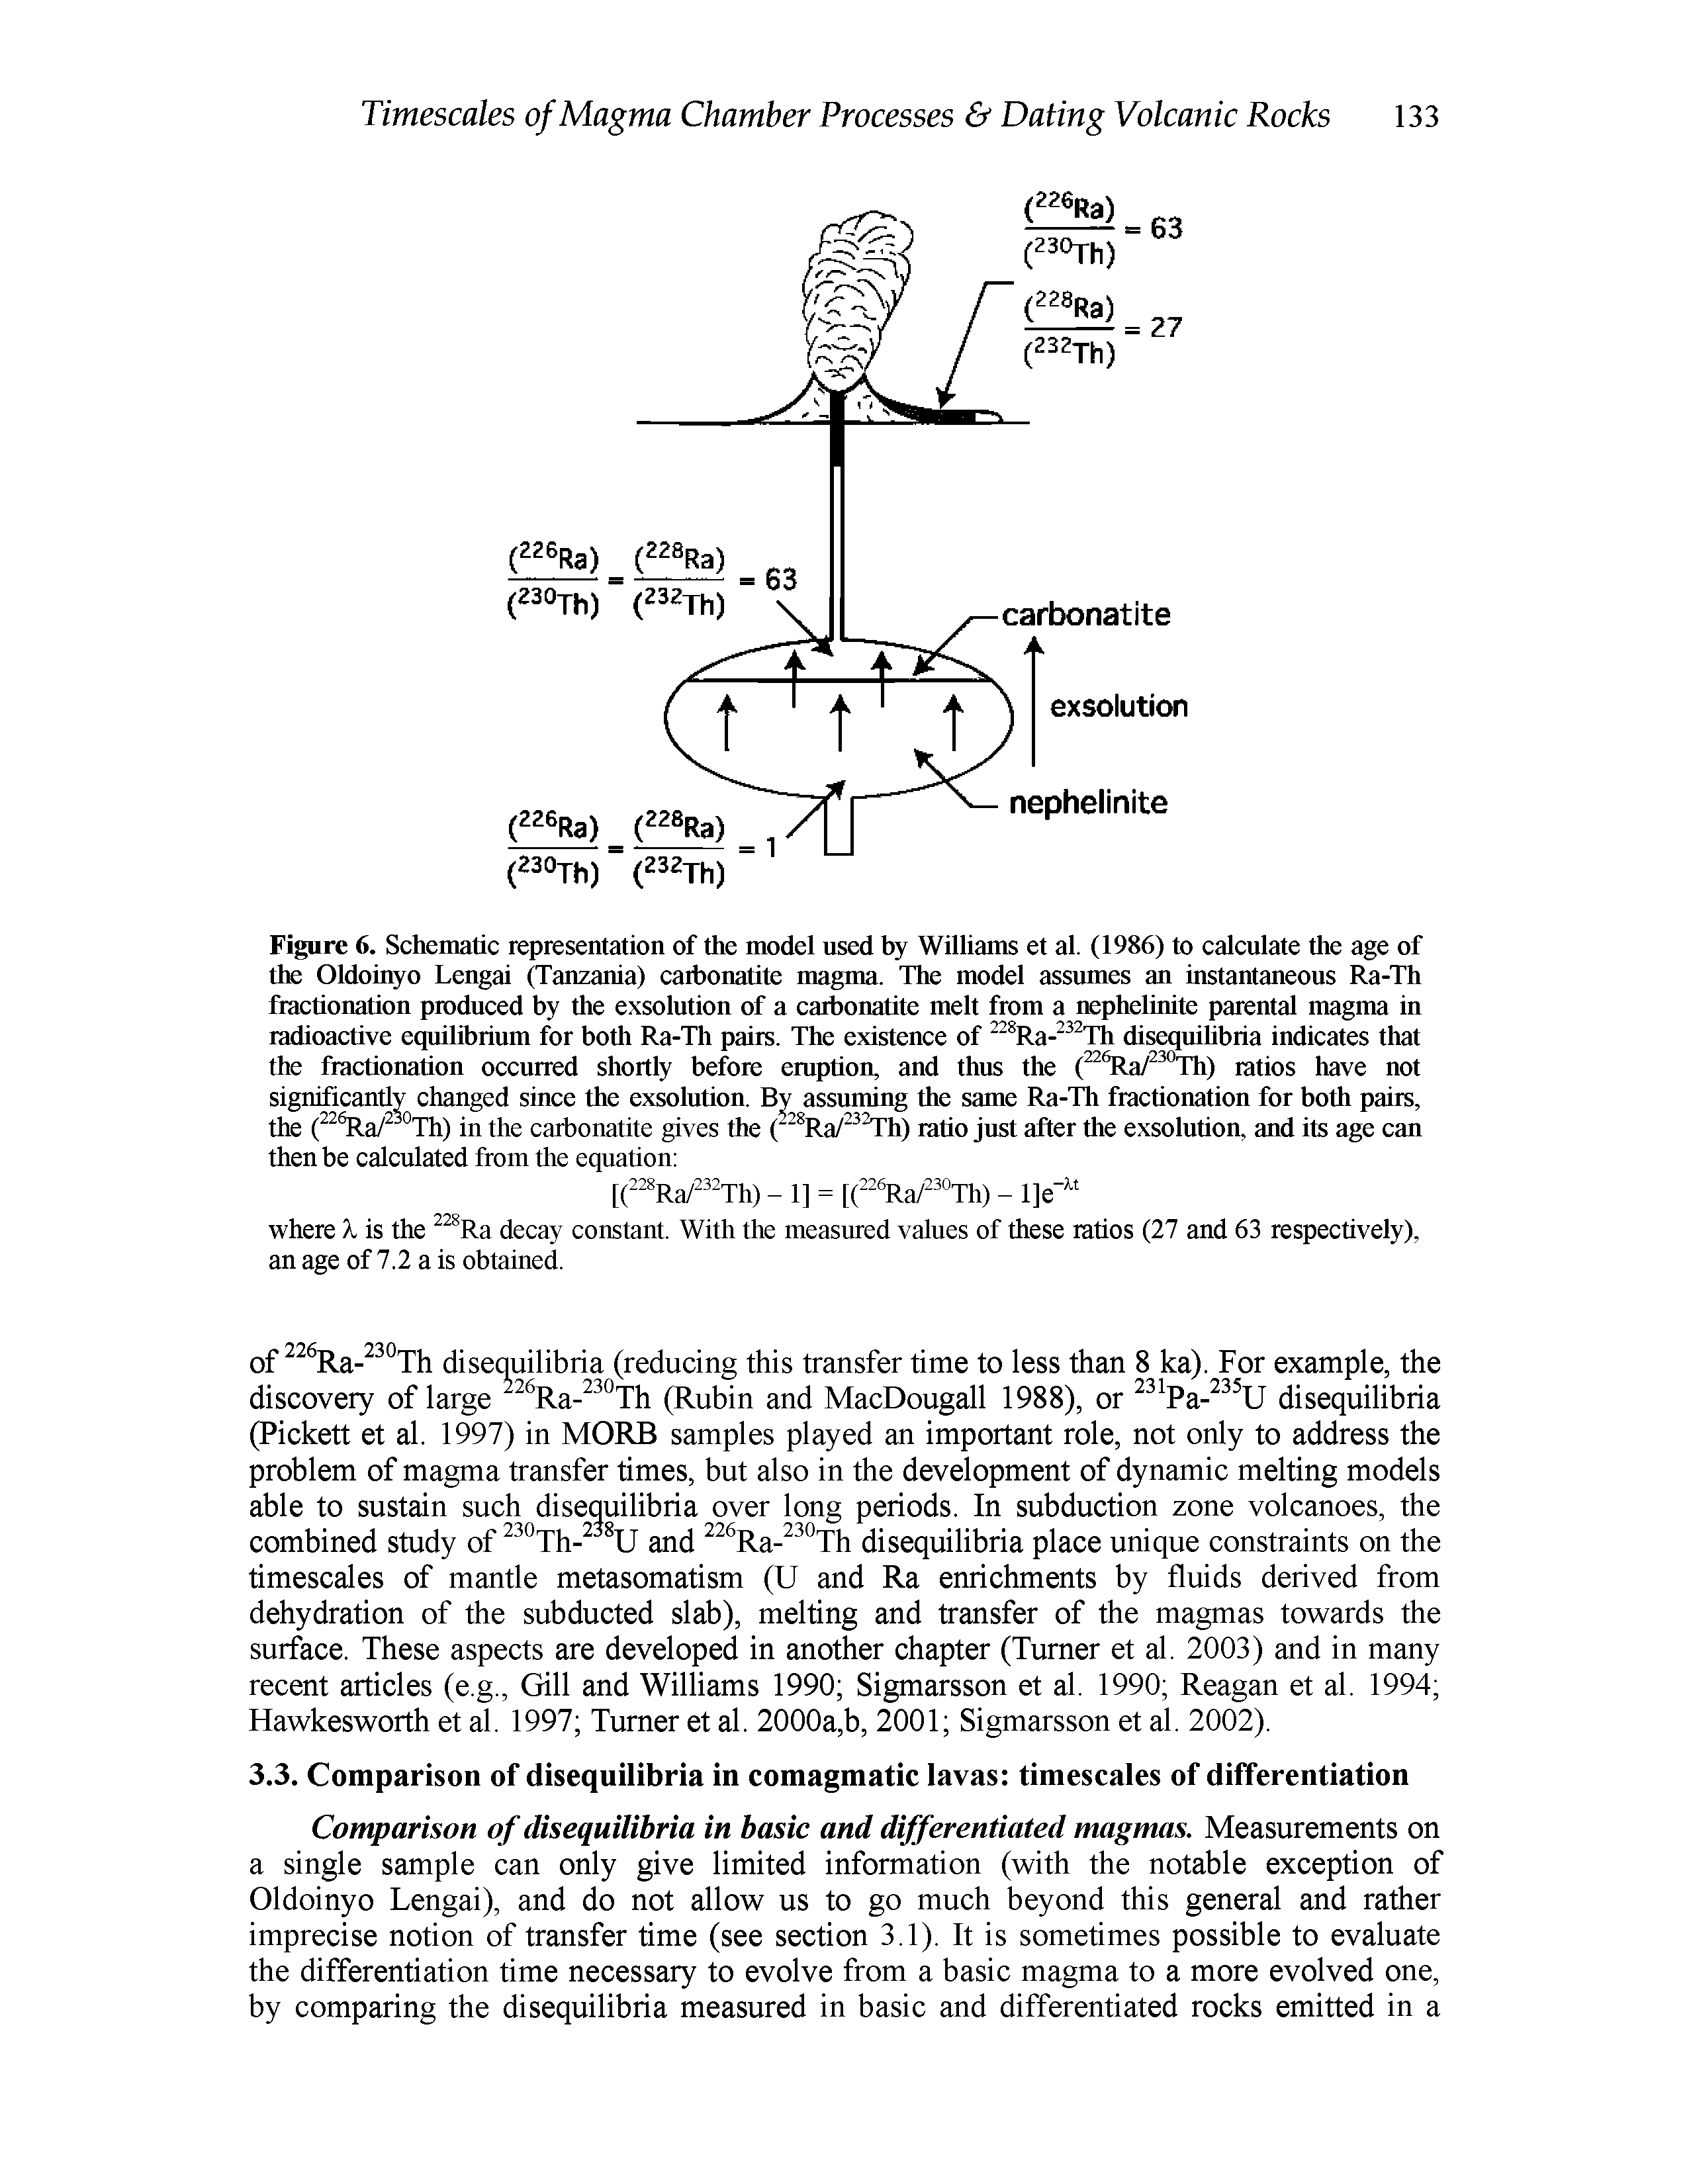 Figure 6. Schematic representation of the model used by Williams et al. (1986) to calculate the age of the Oldoinyo Lengai (Tanzania) caibonatite magma. The model assumes an instantaneous Ra-Th fractionation produced by the exsolution of a carbonatite melt from a nephelinite parental magma in radioactive equilibrium for both Ra-Th pairs. The existence of Ra- Th disequihbria indicates that the fractionation occurred shortly before eruption, and thus the ( Tla/ °Th) ratios have not significantly changed since the exsolution. By assuming the same Ra-Th fractionation for both pairs, the ( Ra/ °Th) in the carbonatite gives the ( Ra/ h) ratio just after the exsolution, and its age can then be calculated from the equation ...